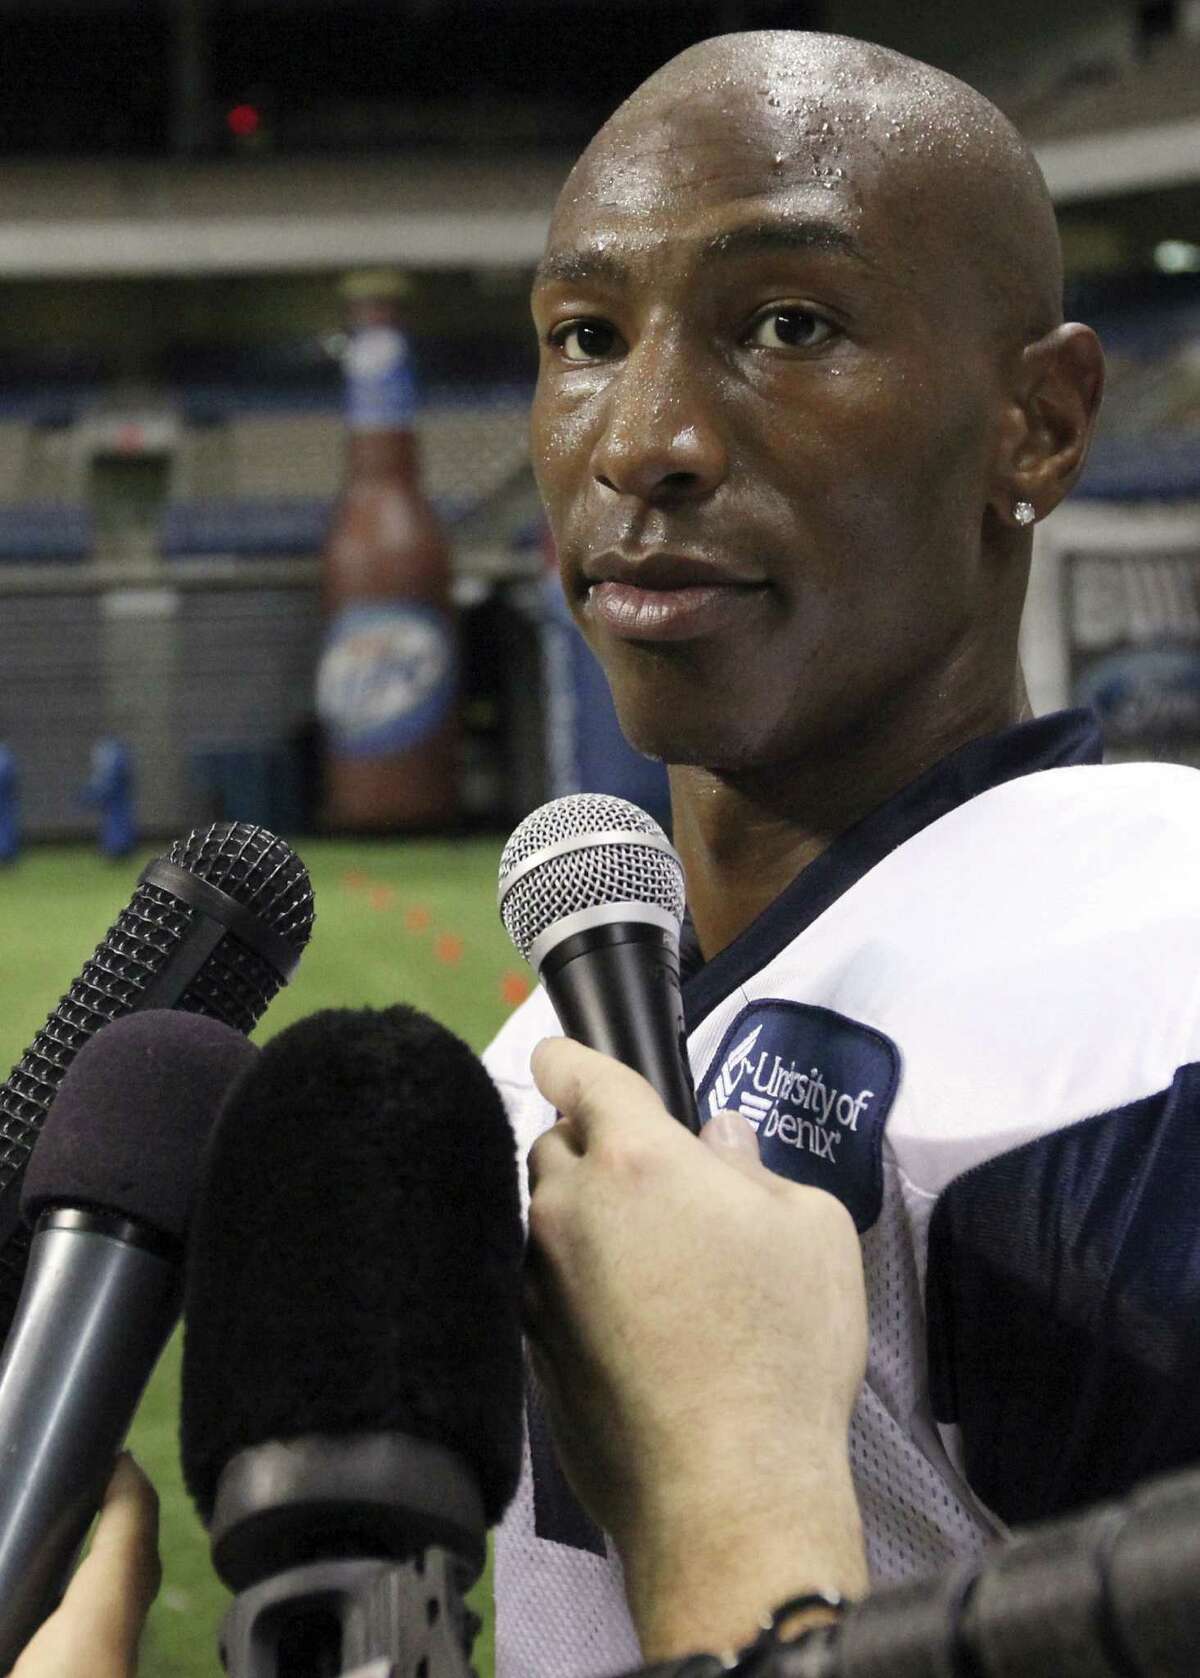 Former Dallas Cowboy Sam Hurd was sentenced to 15 years in prison for his role in a drug-pushing scheme while playing for the Chicago Bears,completing a steep downfall.